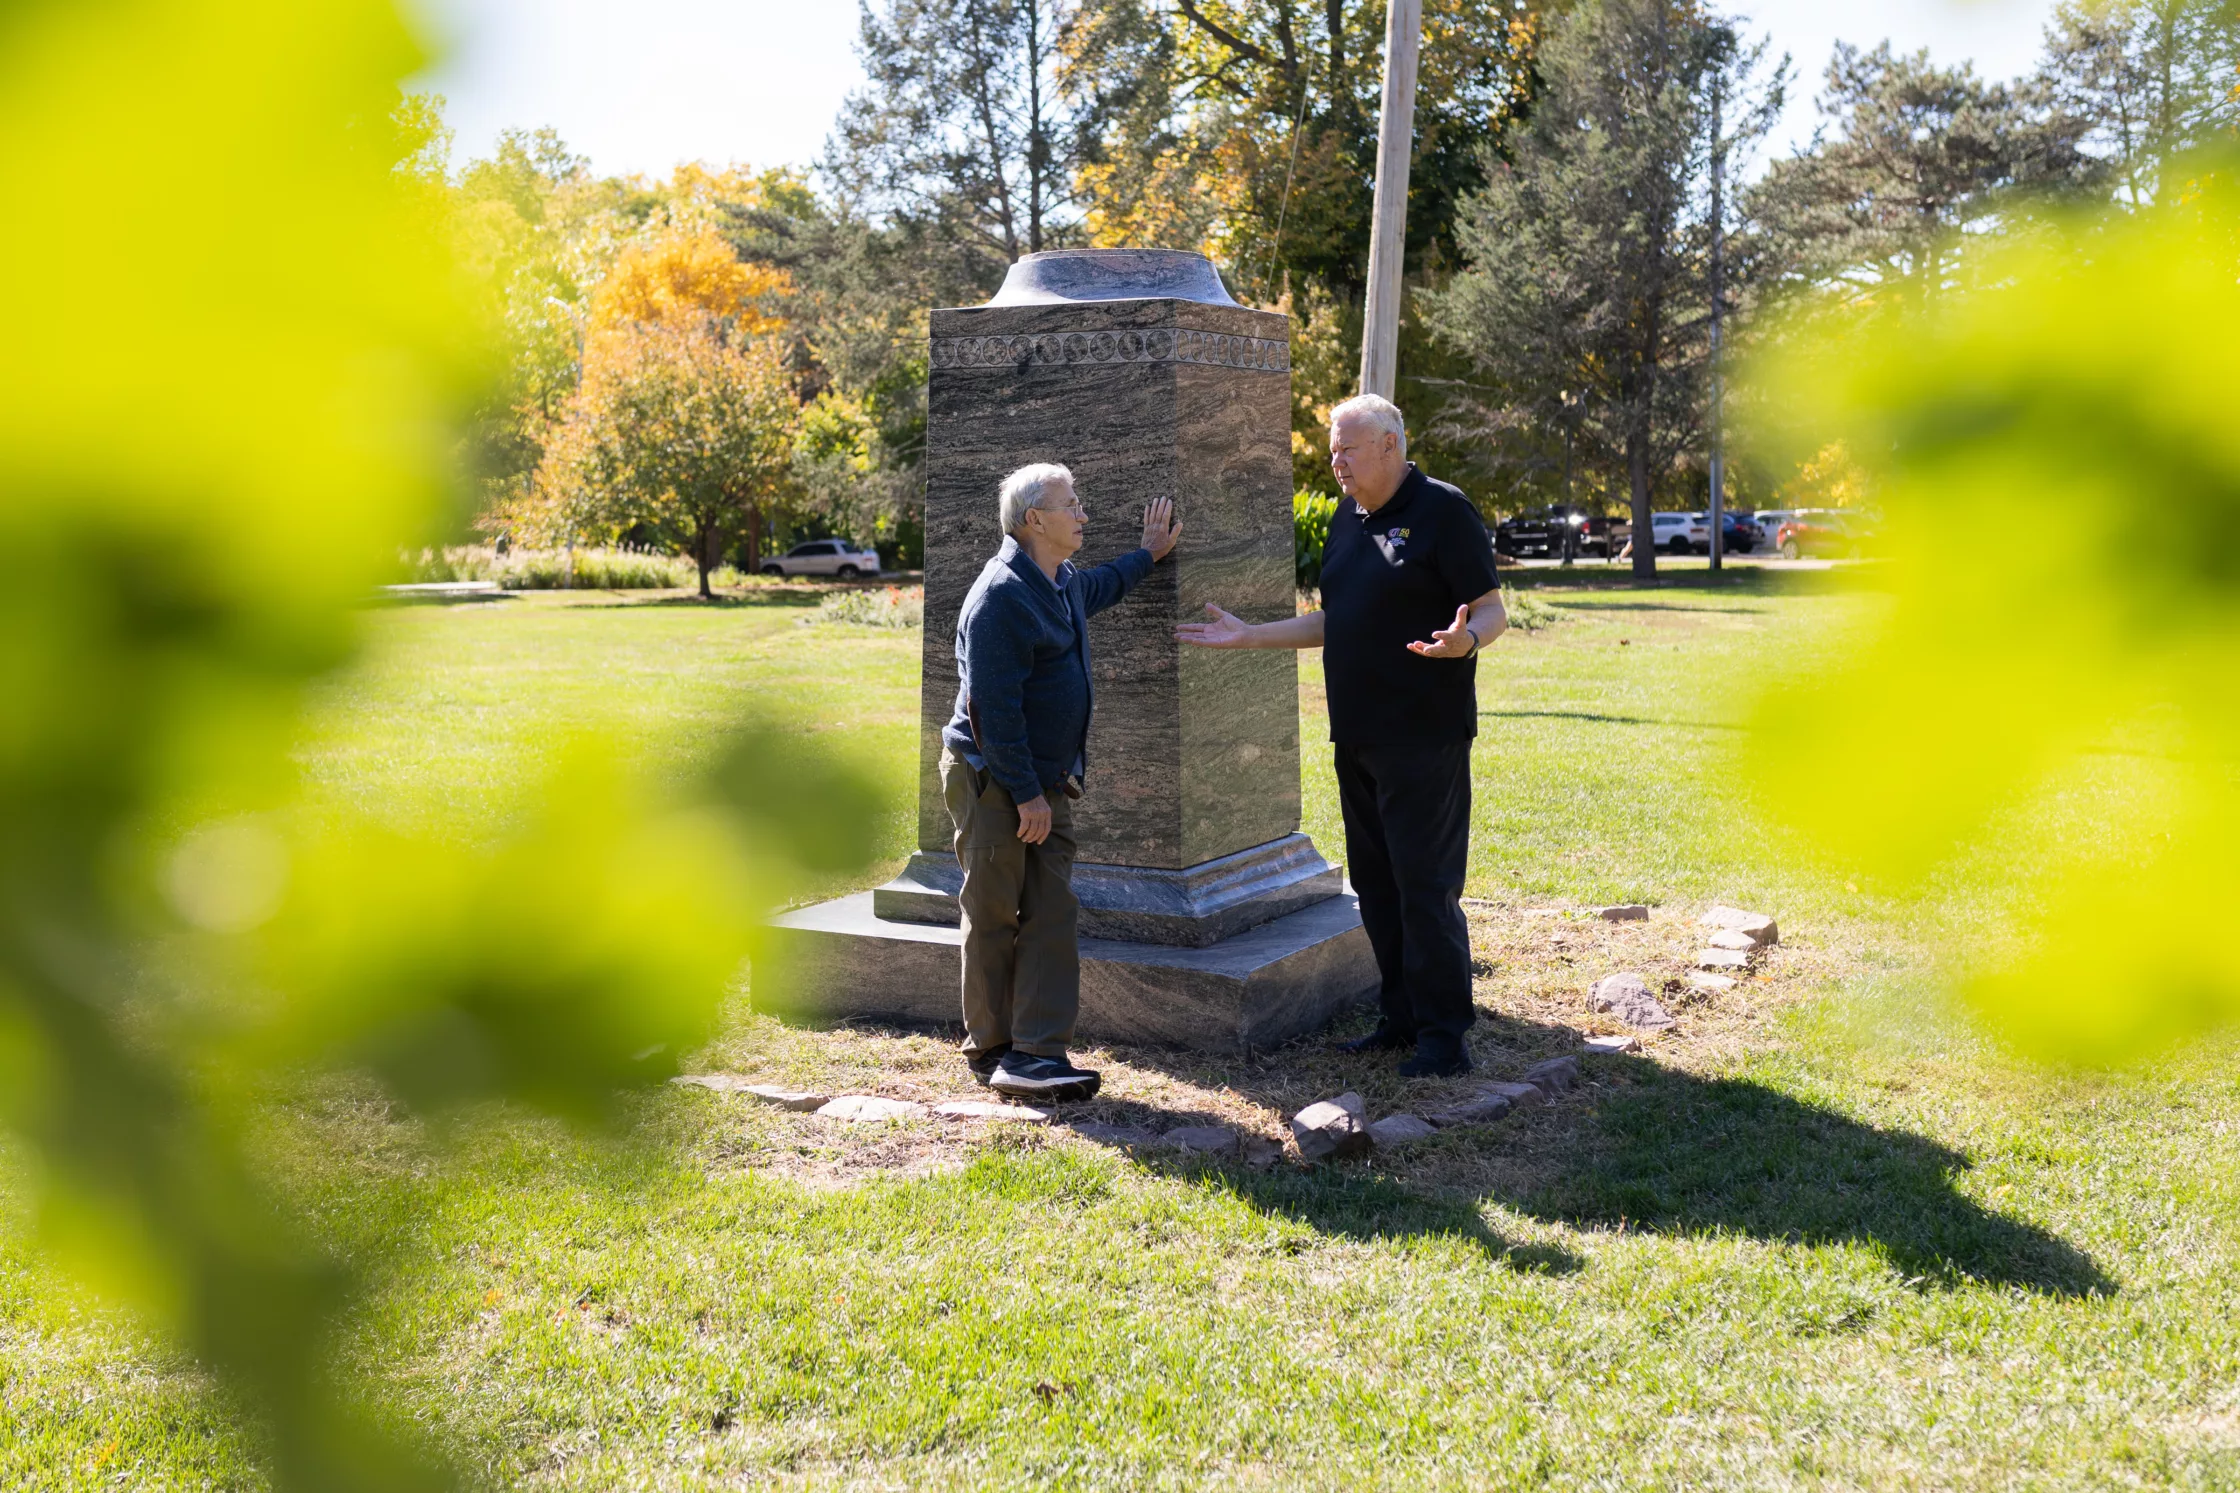 Former Dundee-Memorial Park Association president B.J. Reed (right) and association historian Jim McGee talk at the pedestal where Bosco, aka Mr. Strikeout, once stood in Elmwood Park. Photo by Joseph Saaid for the Flatwater Free Press